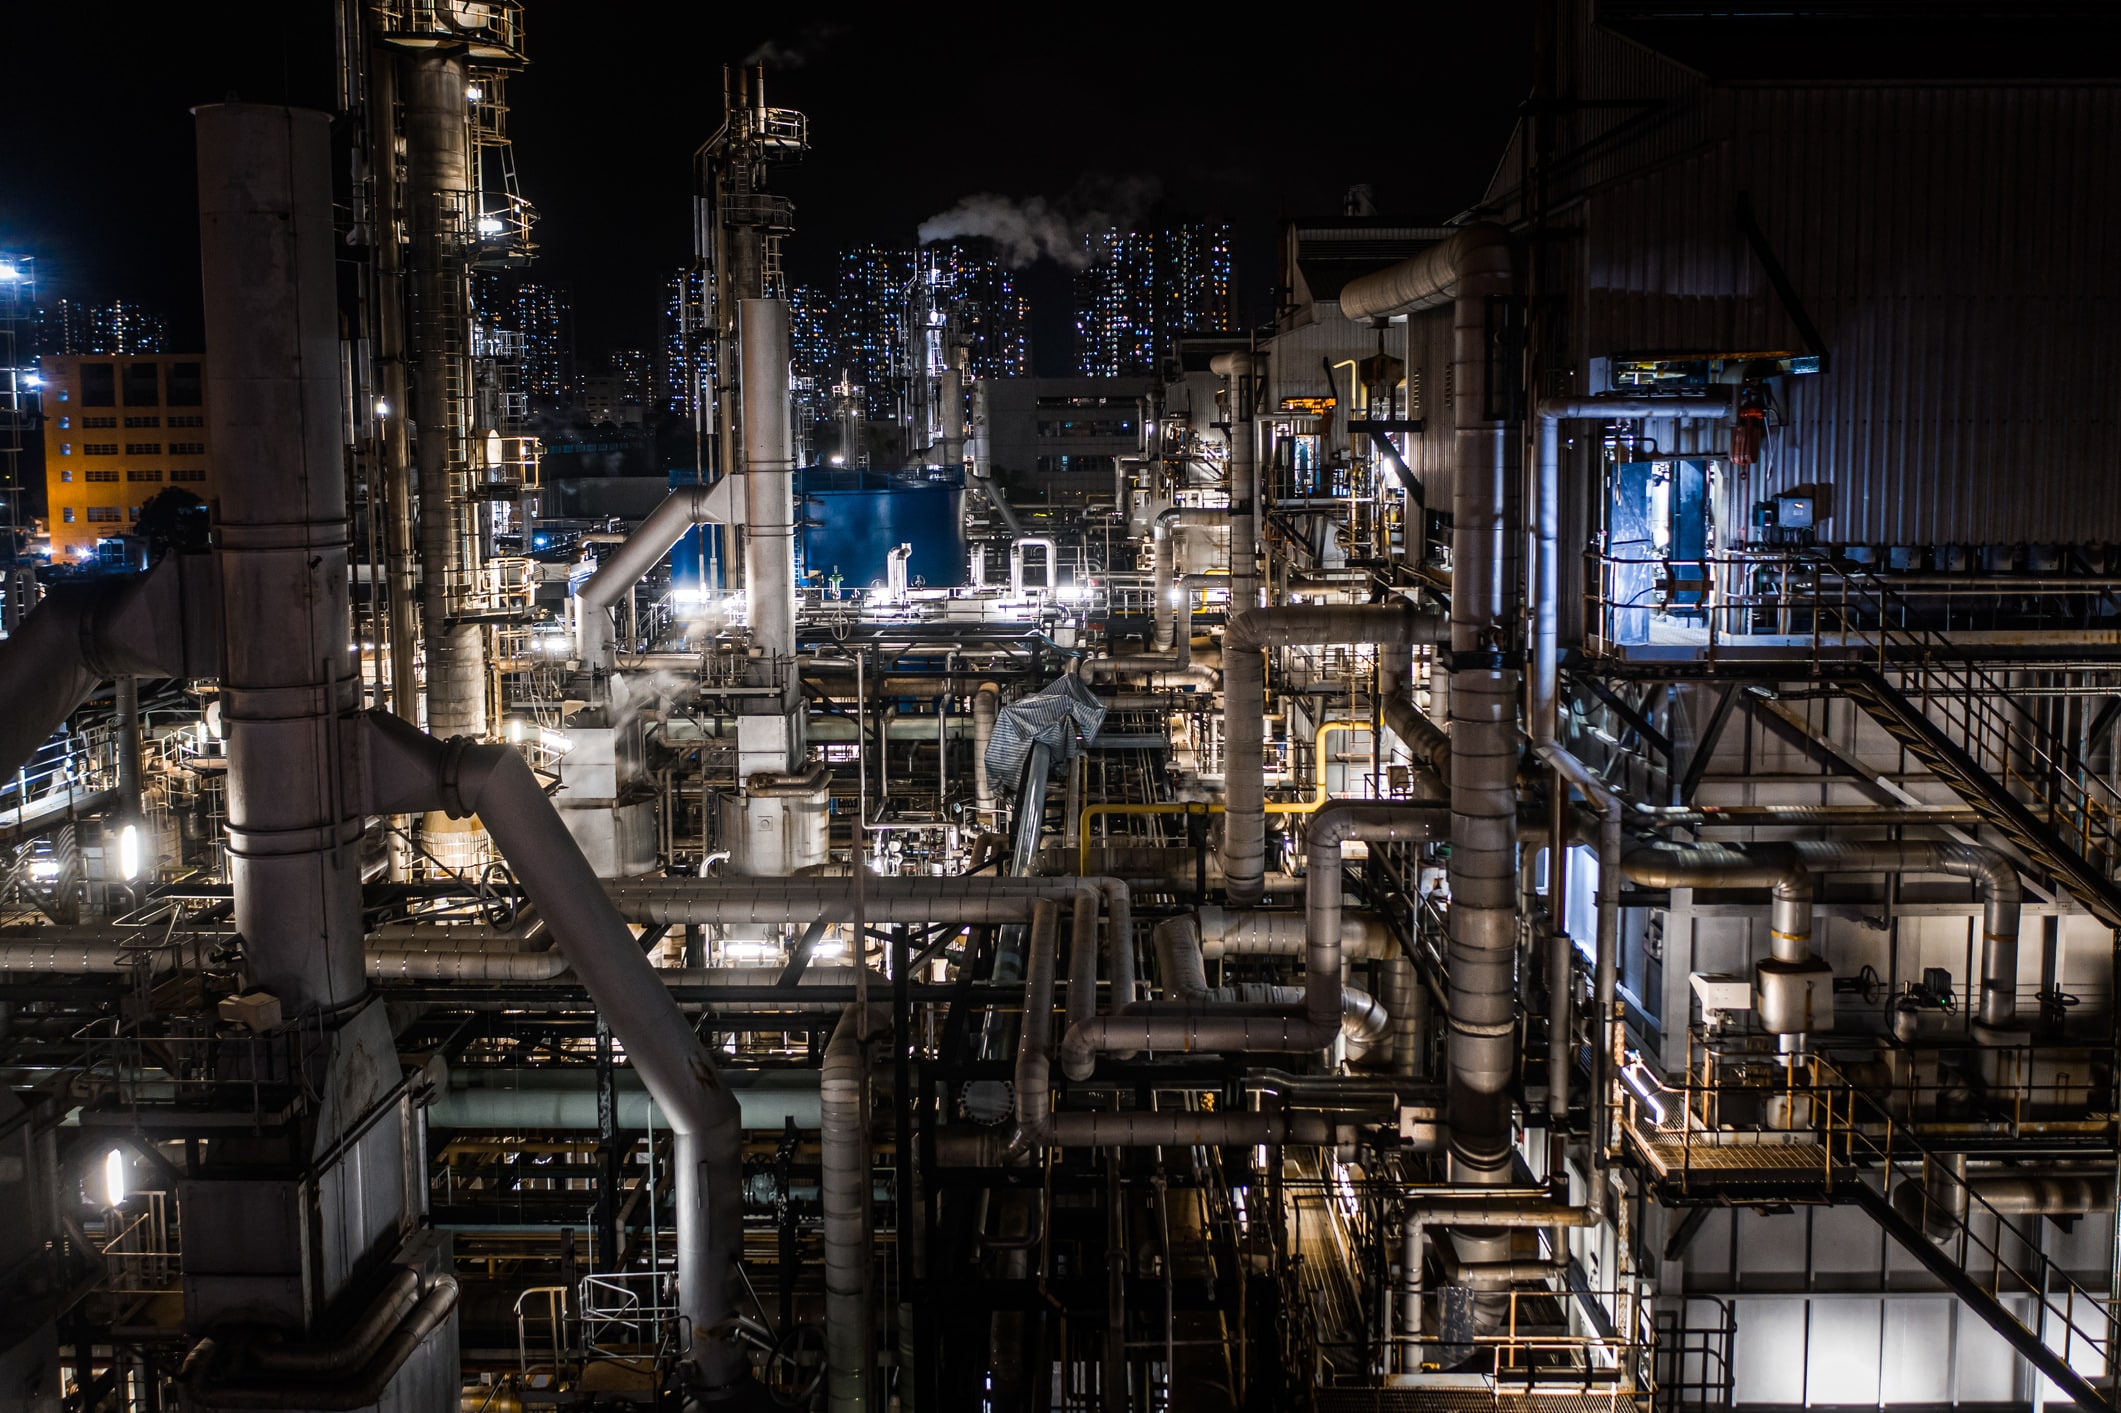 Oil Refinery, Chemical & Petrochemical plant abstract at night.